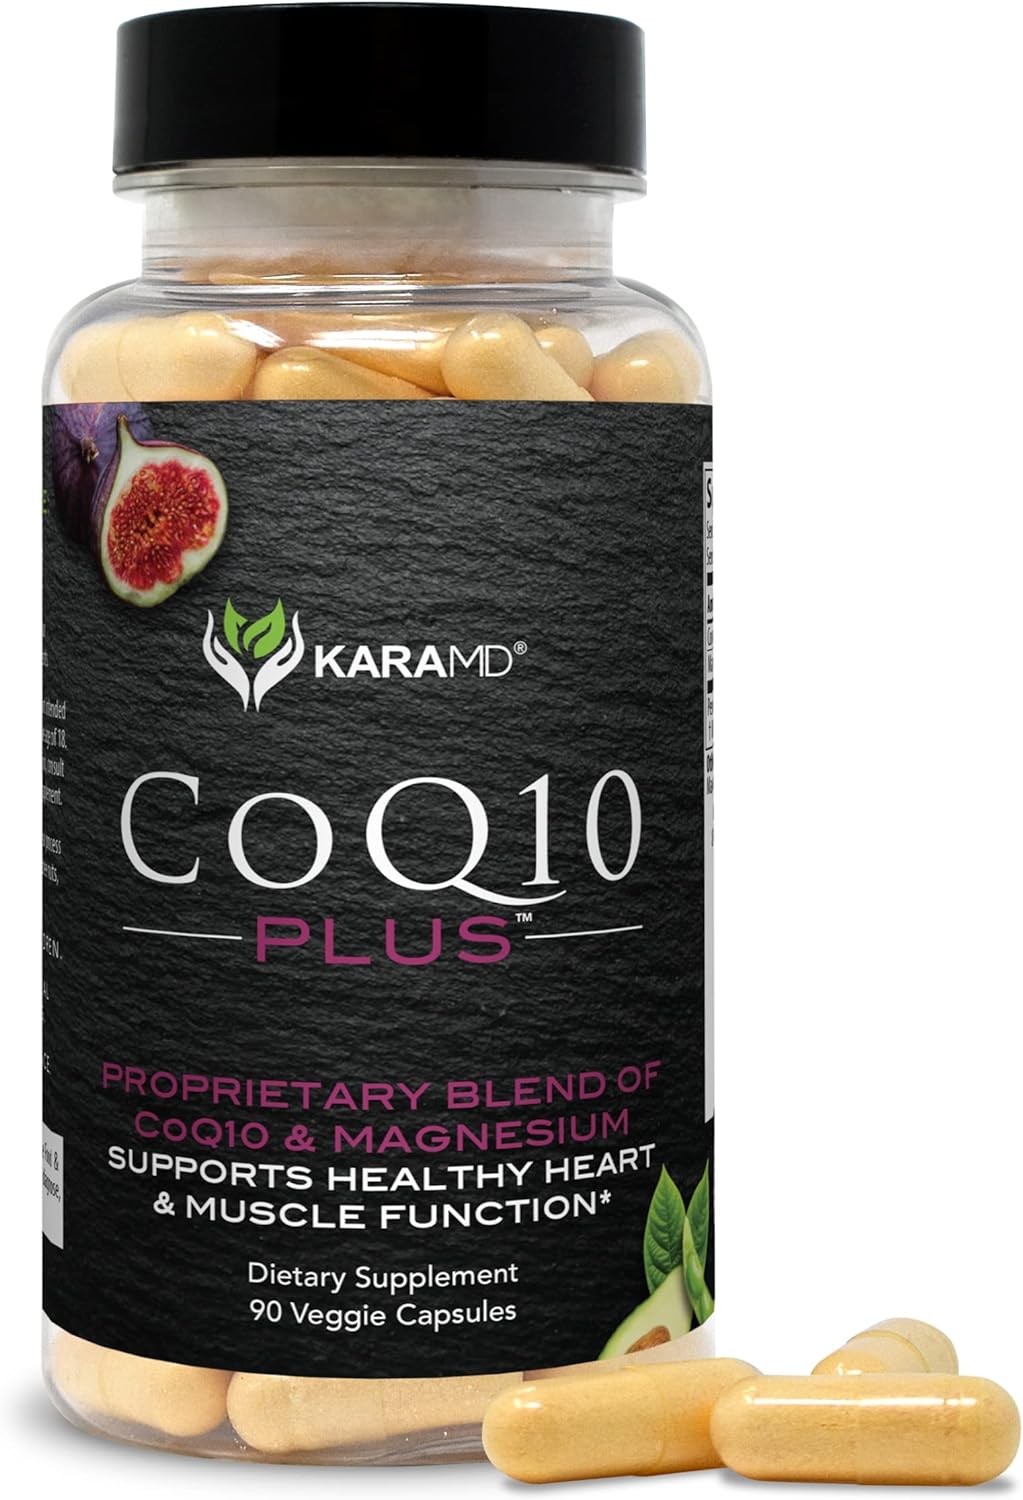 KaraMD CoQ10 Plus - Health Supplement with Magnesium for Heart & Vascular Support - Cellular Energy Production & Blood Flow Supplement - Vegetable Capsules - 45 Servings (90 Capsules) - 1 Pack